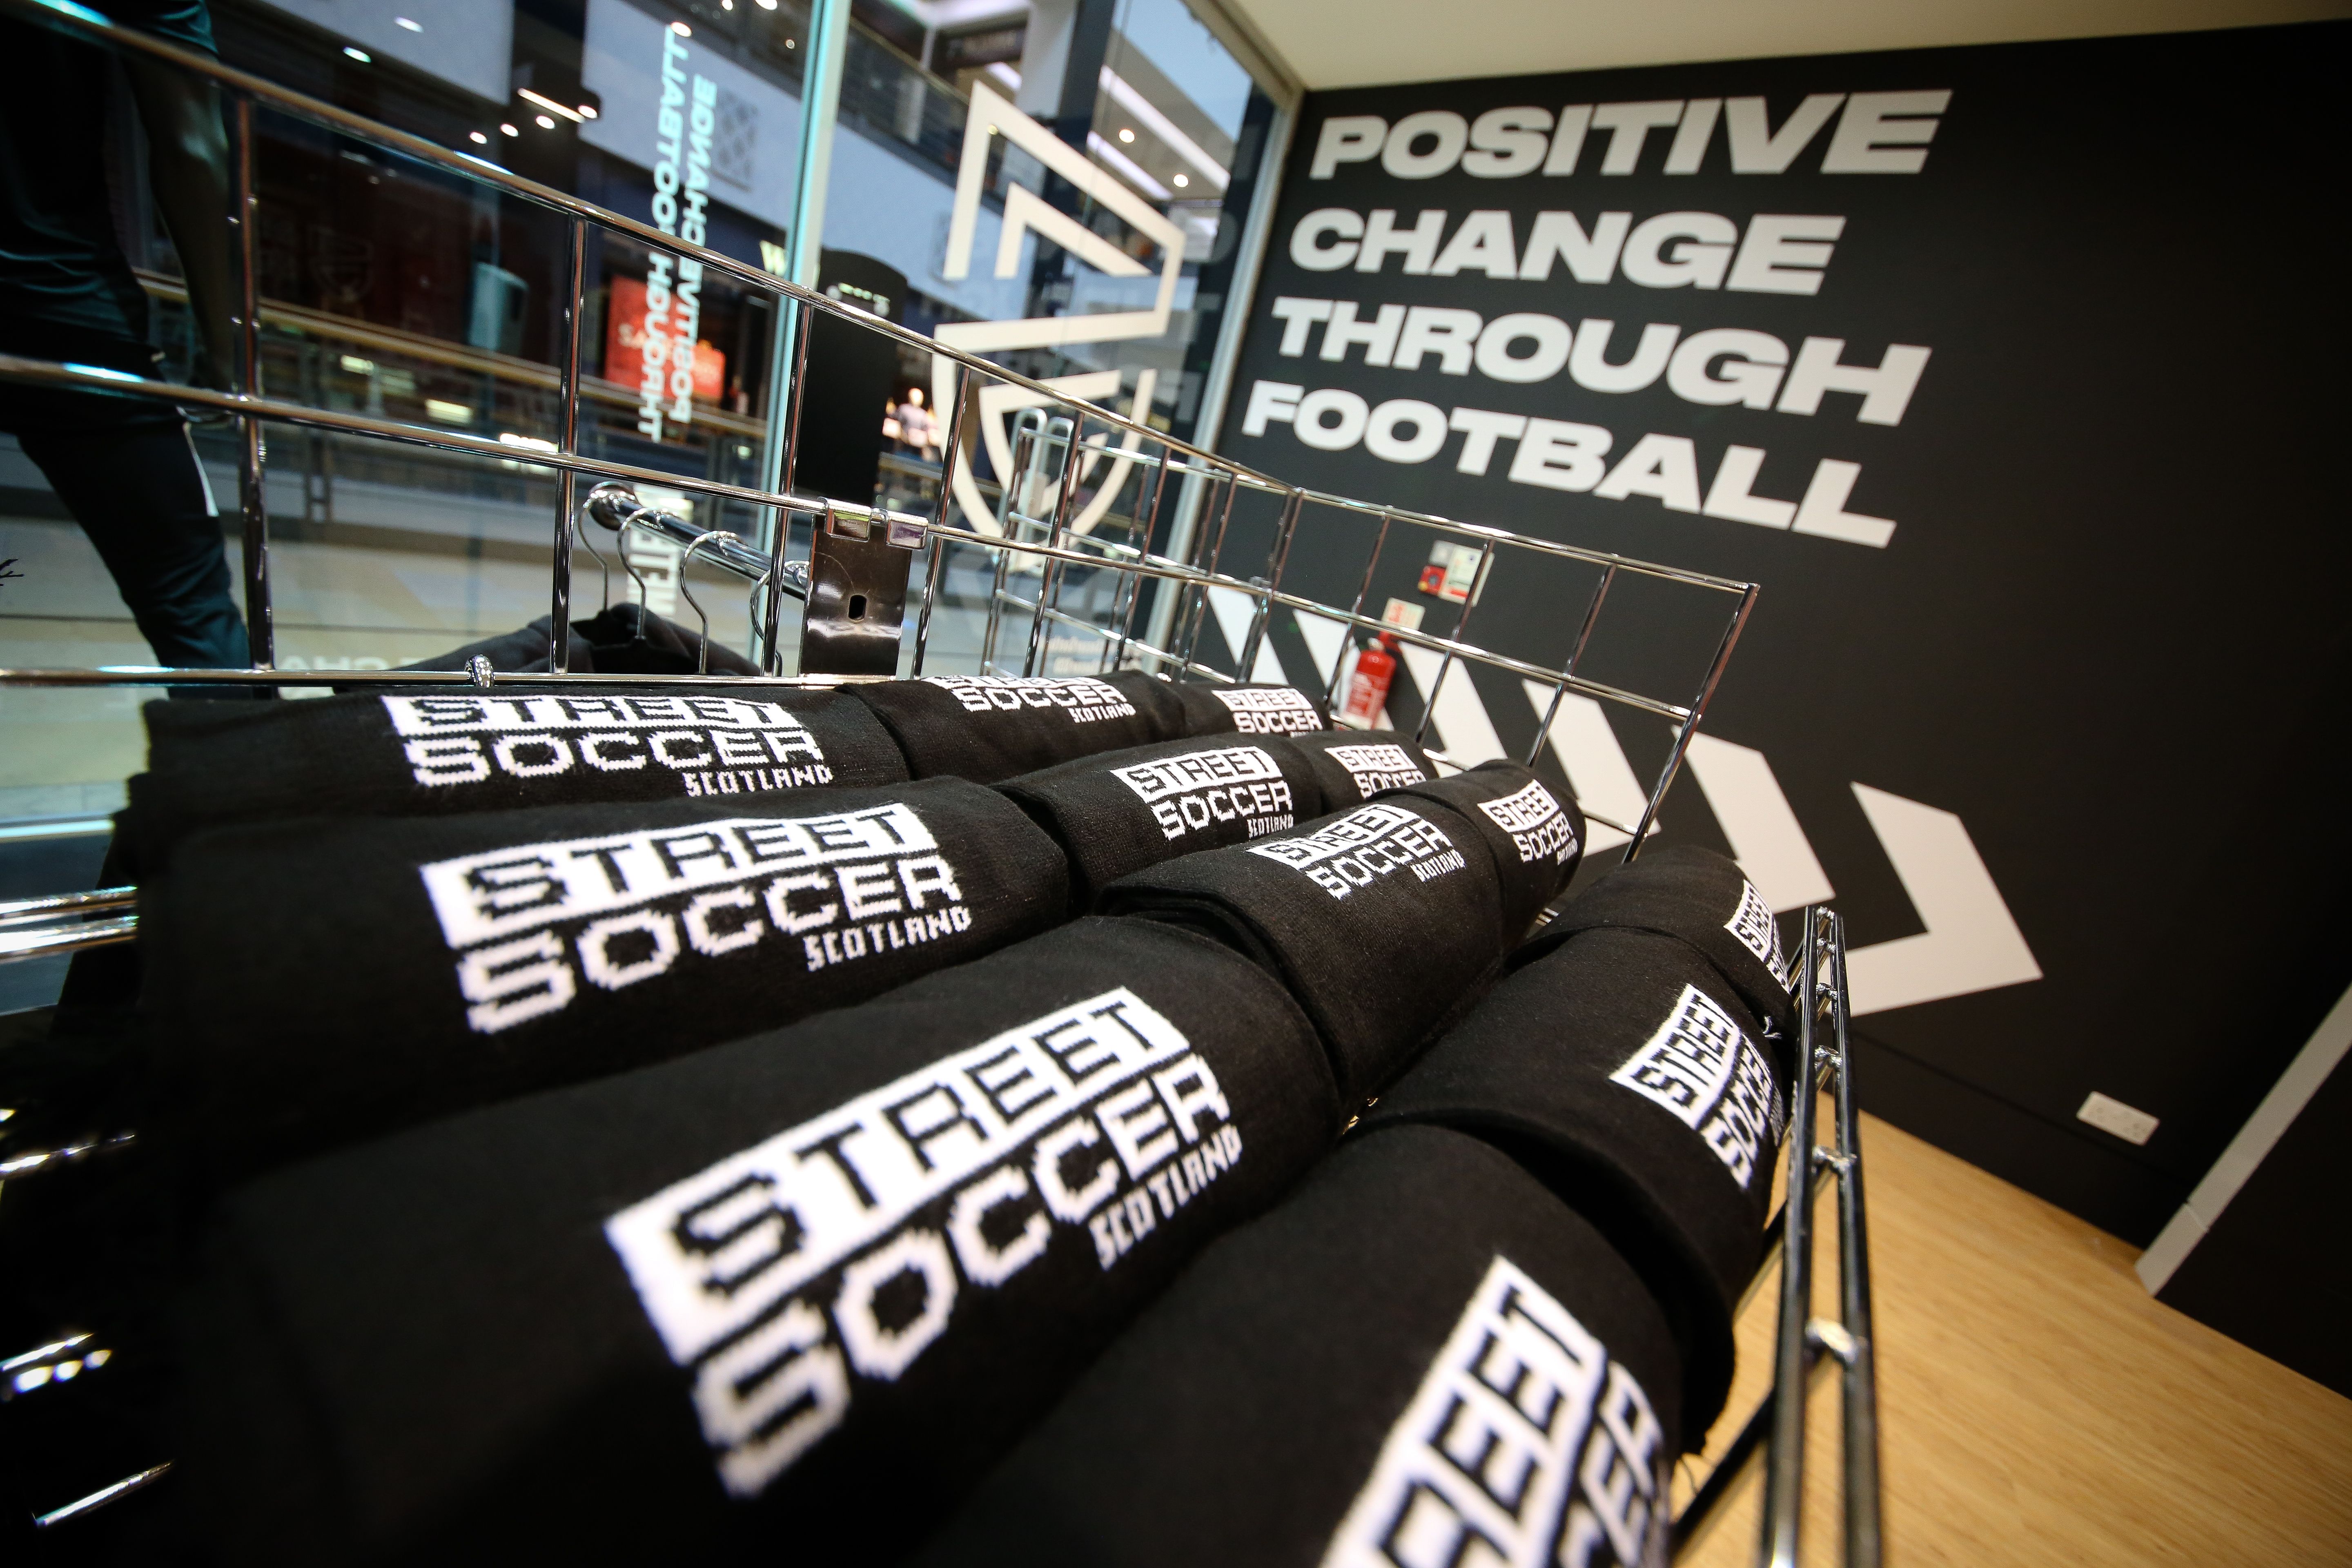 Street Soccer Scotland opens new hub to help provide support and change lives